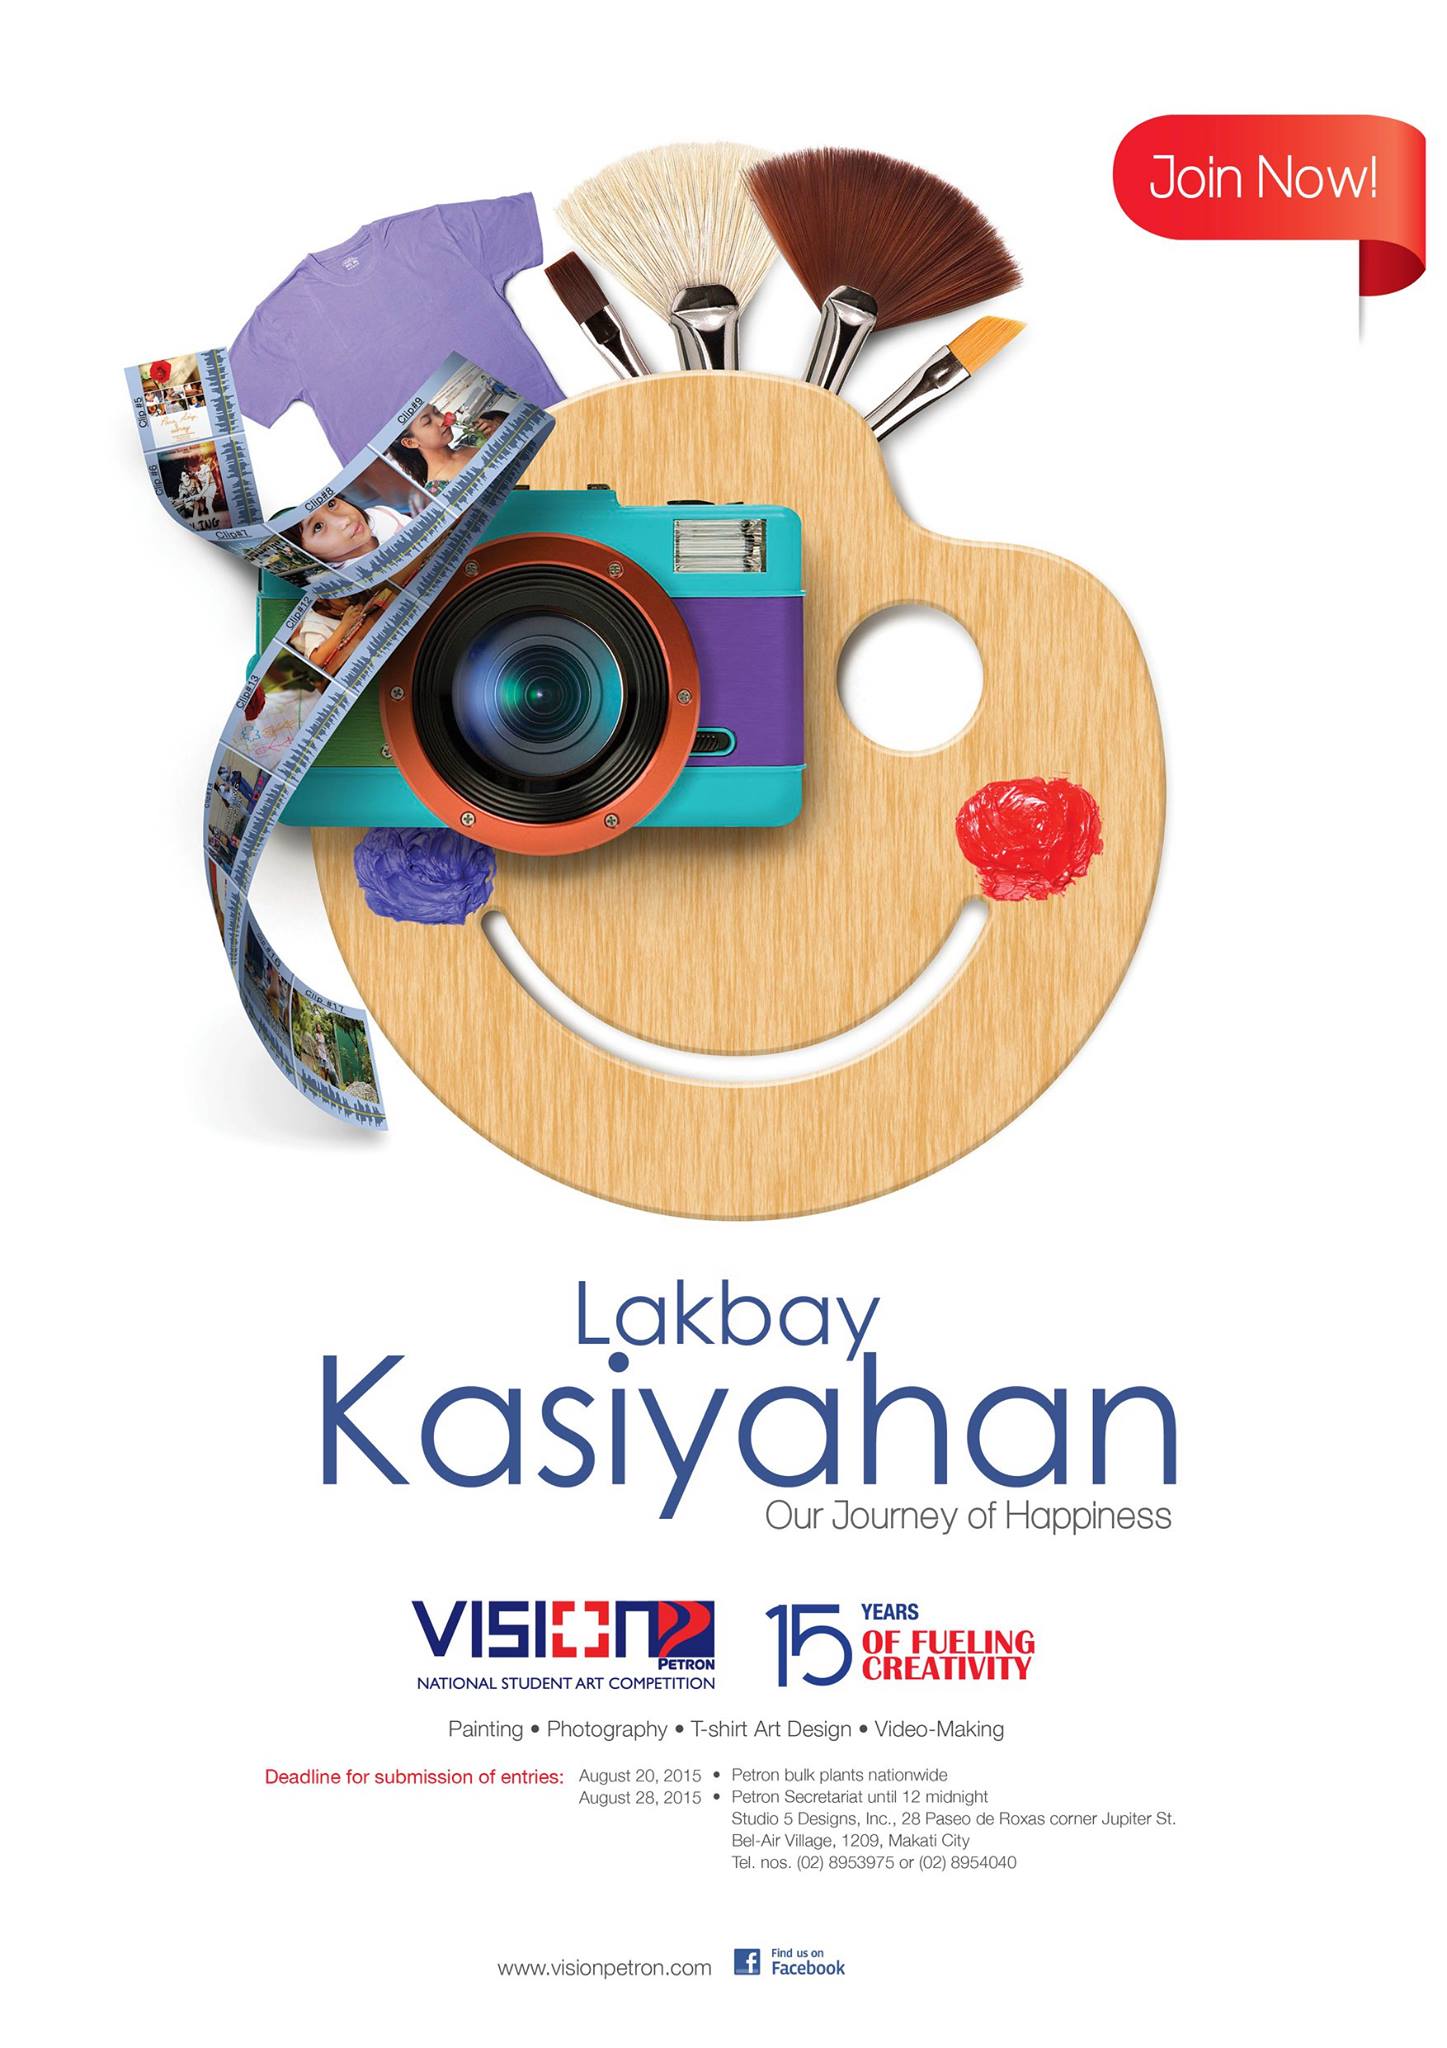 AdminVision PetronAdmin This year's theme, LAKBAY KASIYAHAN (Our Journey of Happiness), Vision Petron would like to know why Filipinos are one of the happiest people on earth. Now is the time to prove it through your paintings, photographs, t-shirt art designs and videos. Link through online registration will be posted here soon. smile emoticon